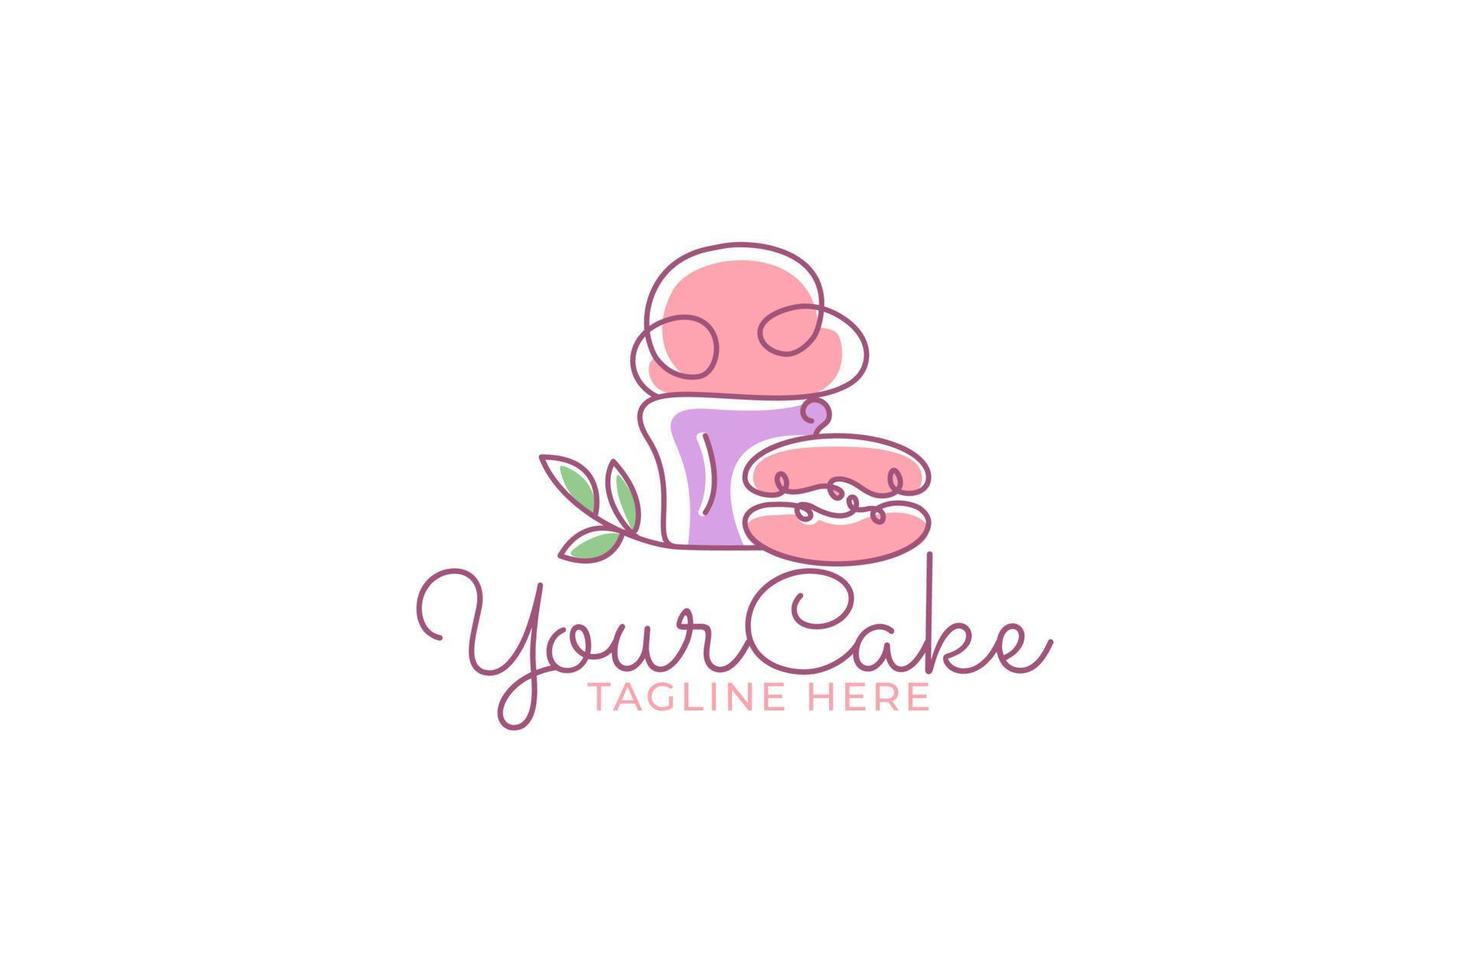 simple cupcake logo vector graphic with a cupcake and leaves for any business, especially for bakery, cakery, food and beverage, cafe, etc.